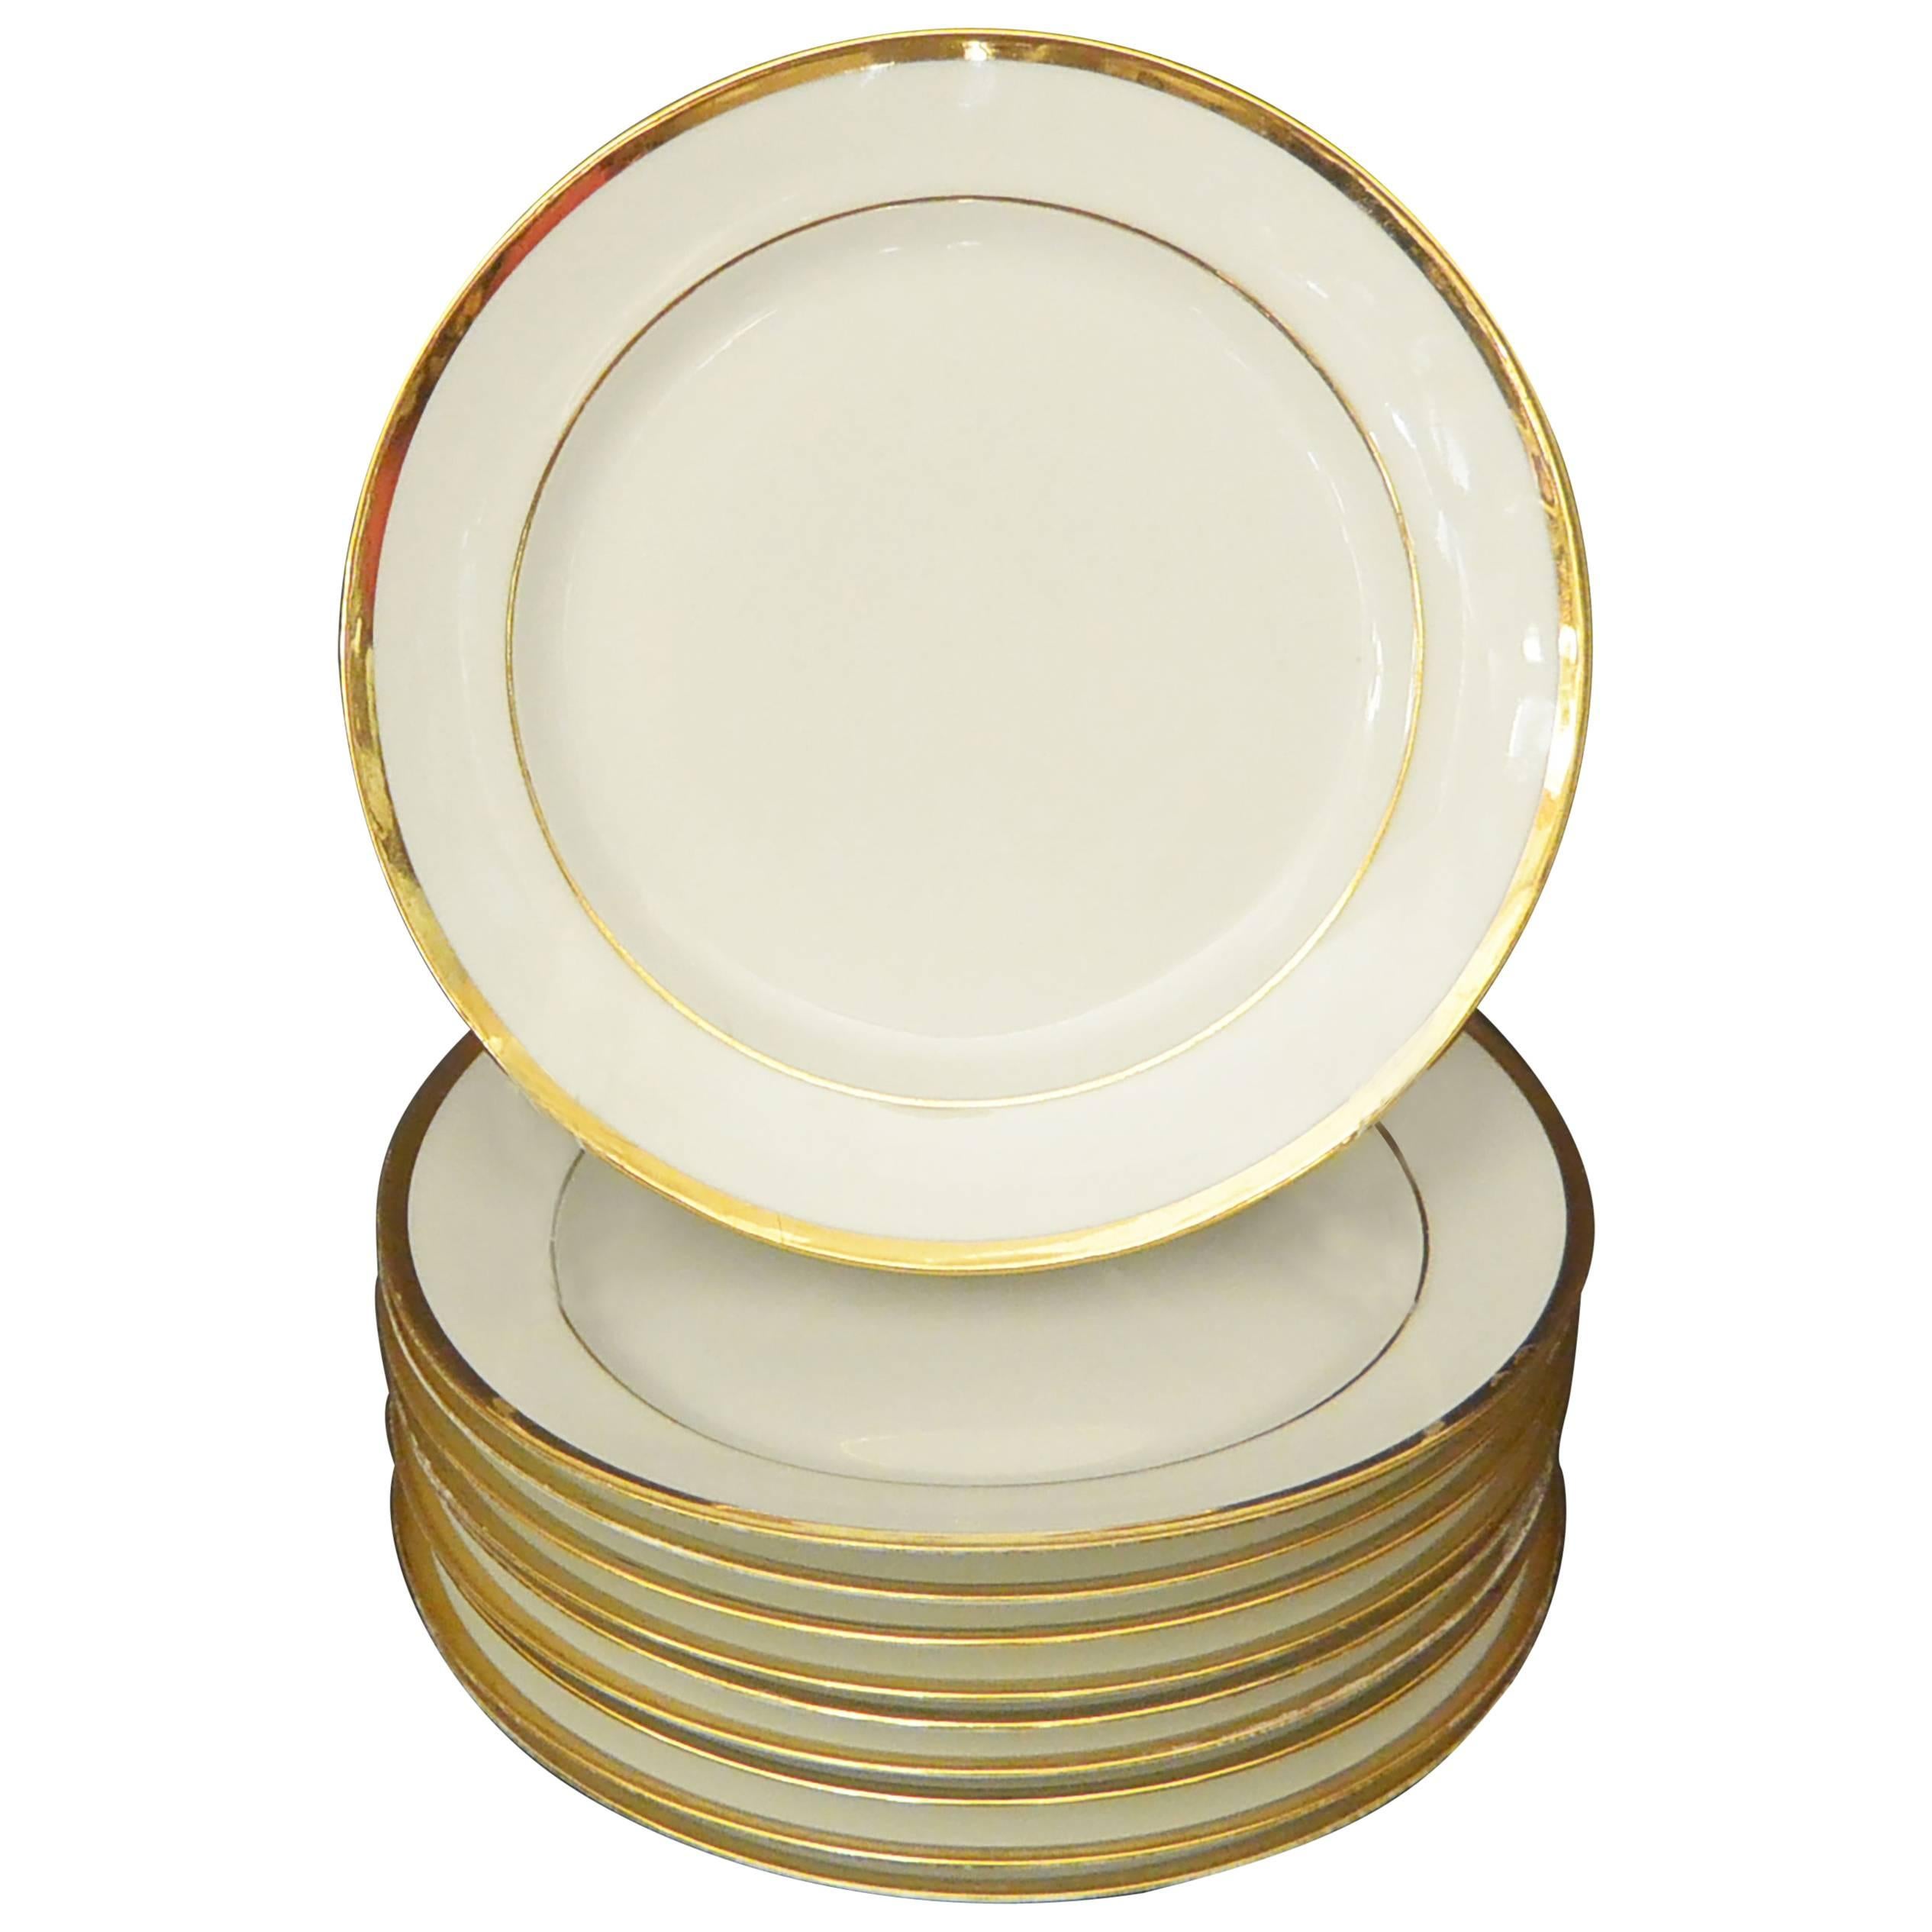 Set of Ten White and Gilt French Empire Plates